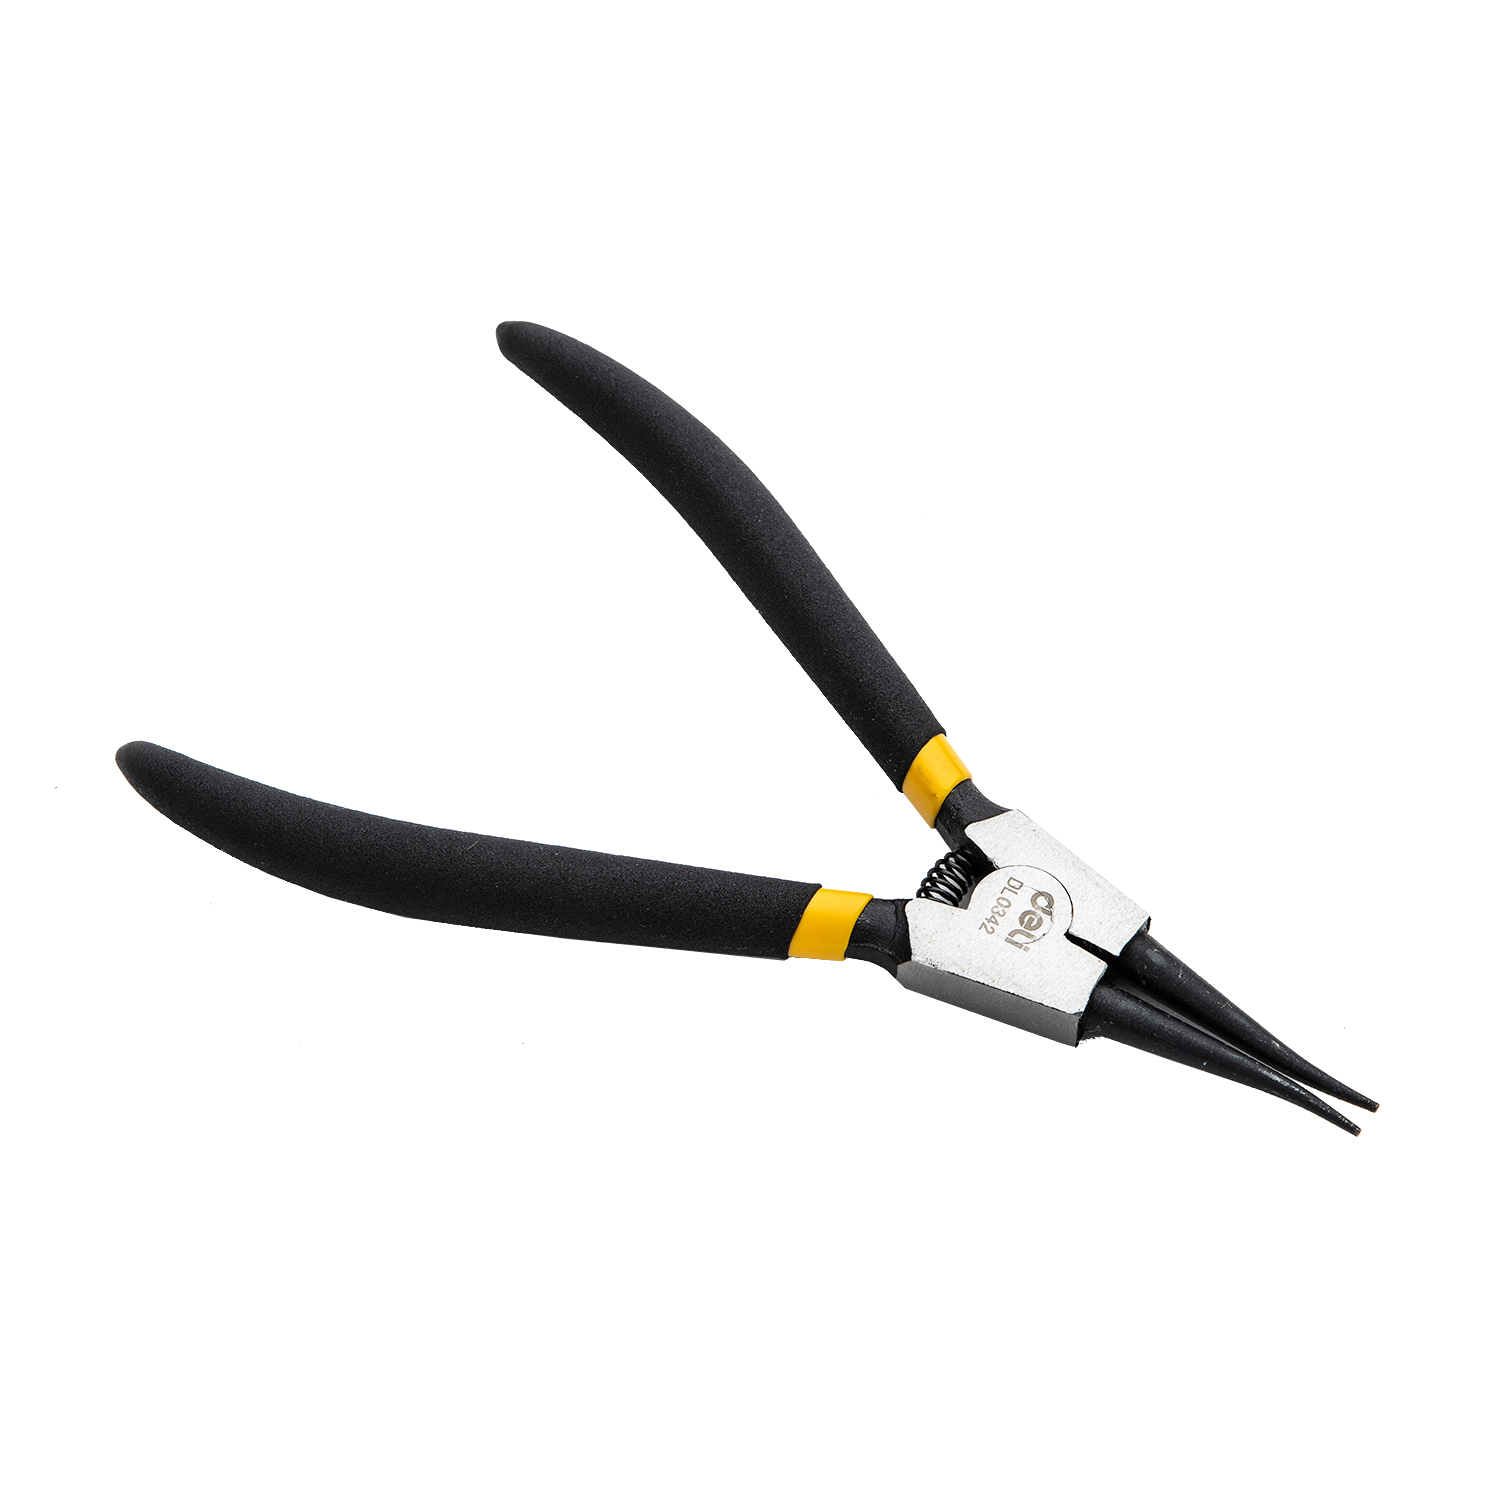 Professional Extrernal Straight Circlip Plier for Shaft